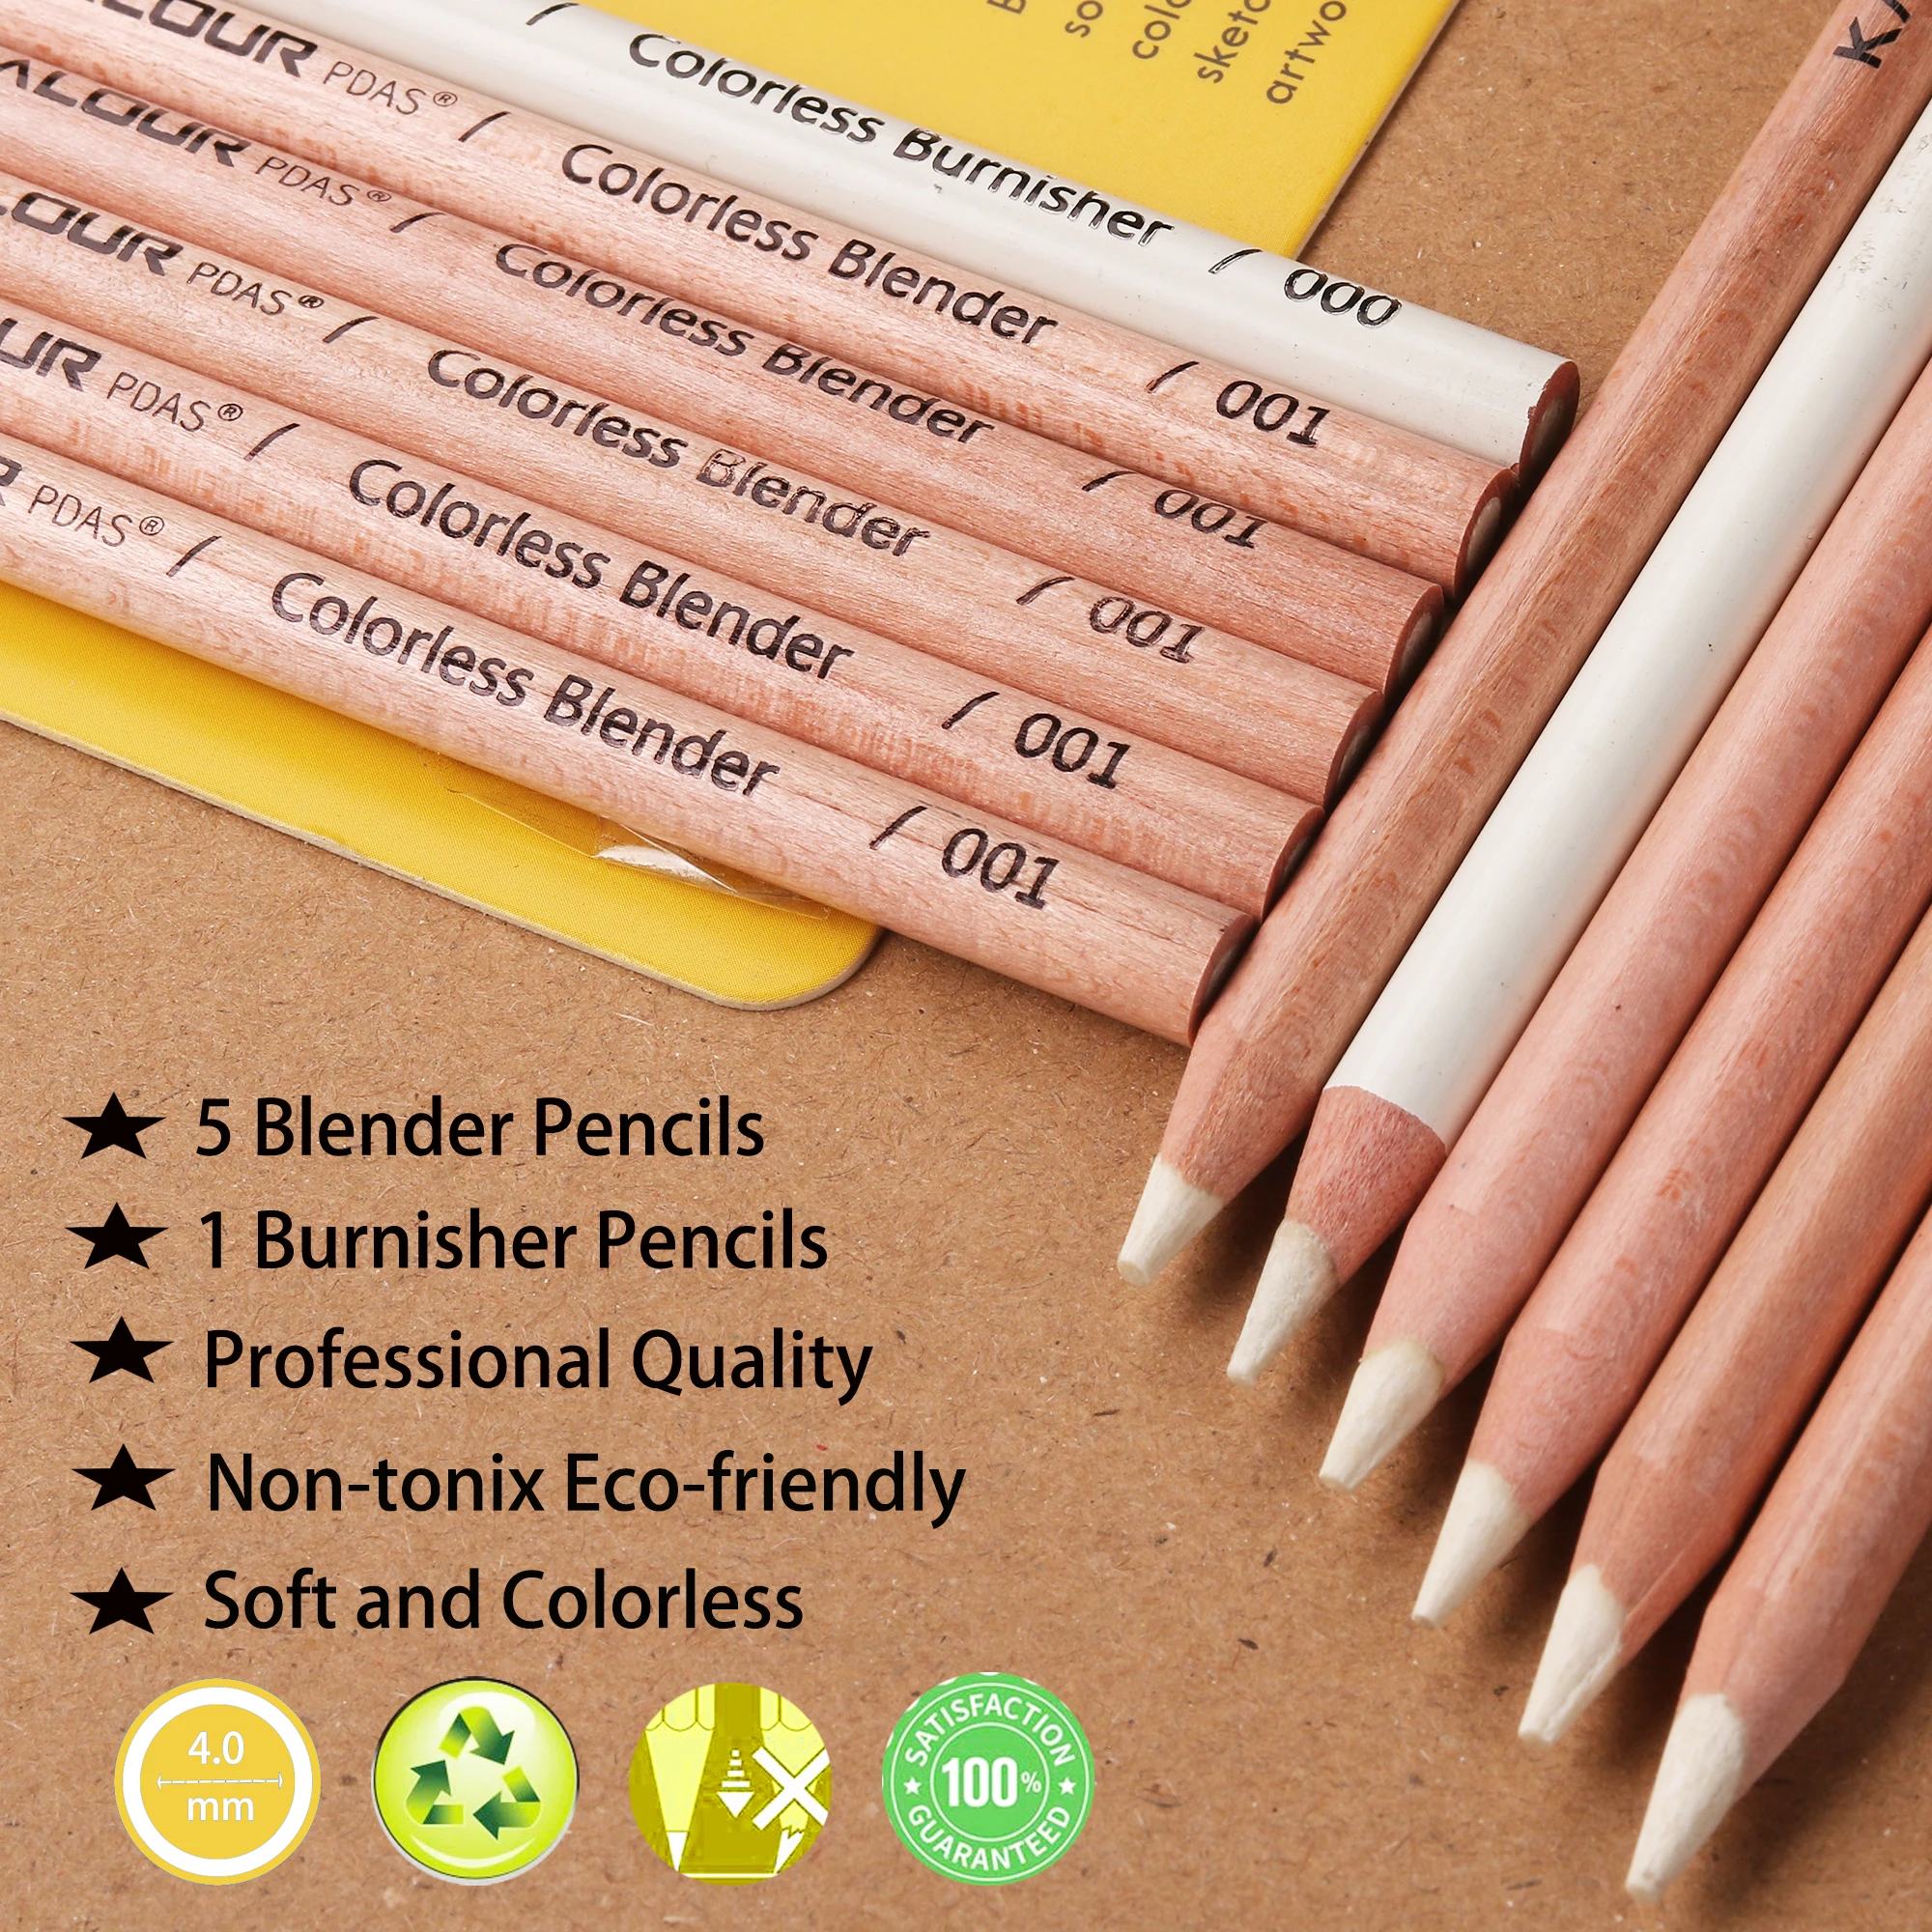 KALOUR Colorless Blender and Burnisher Pencils Set,Non-pigmented, Wax Based Pencil,perfect for Blending Softening Edges